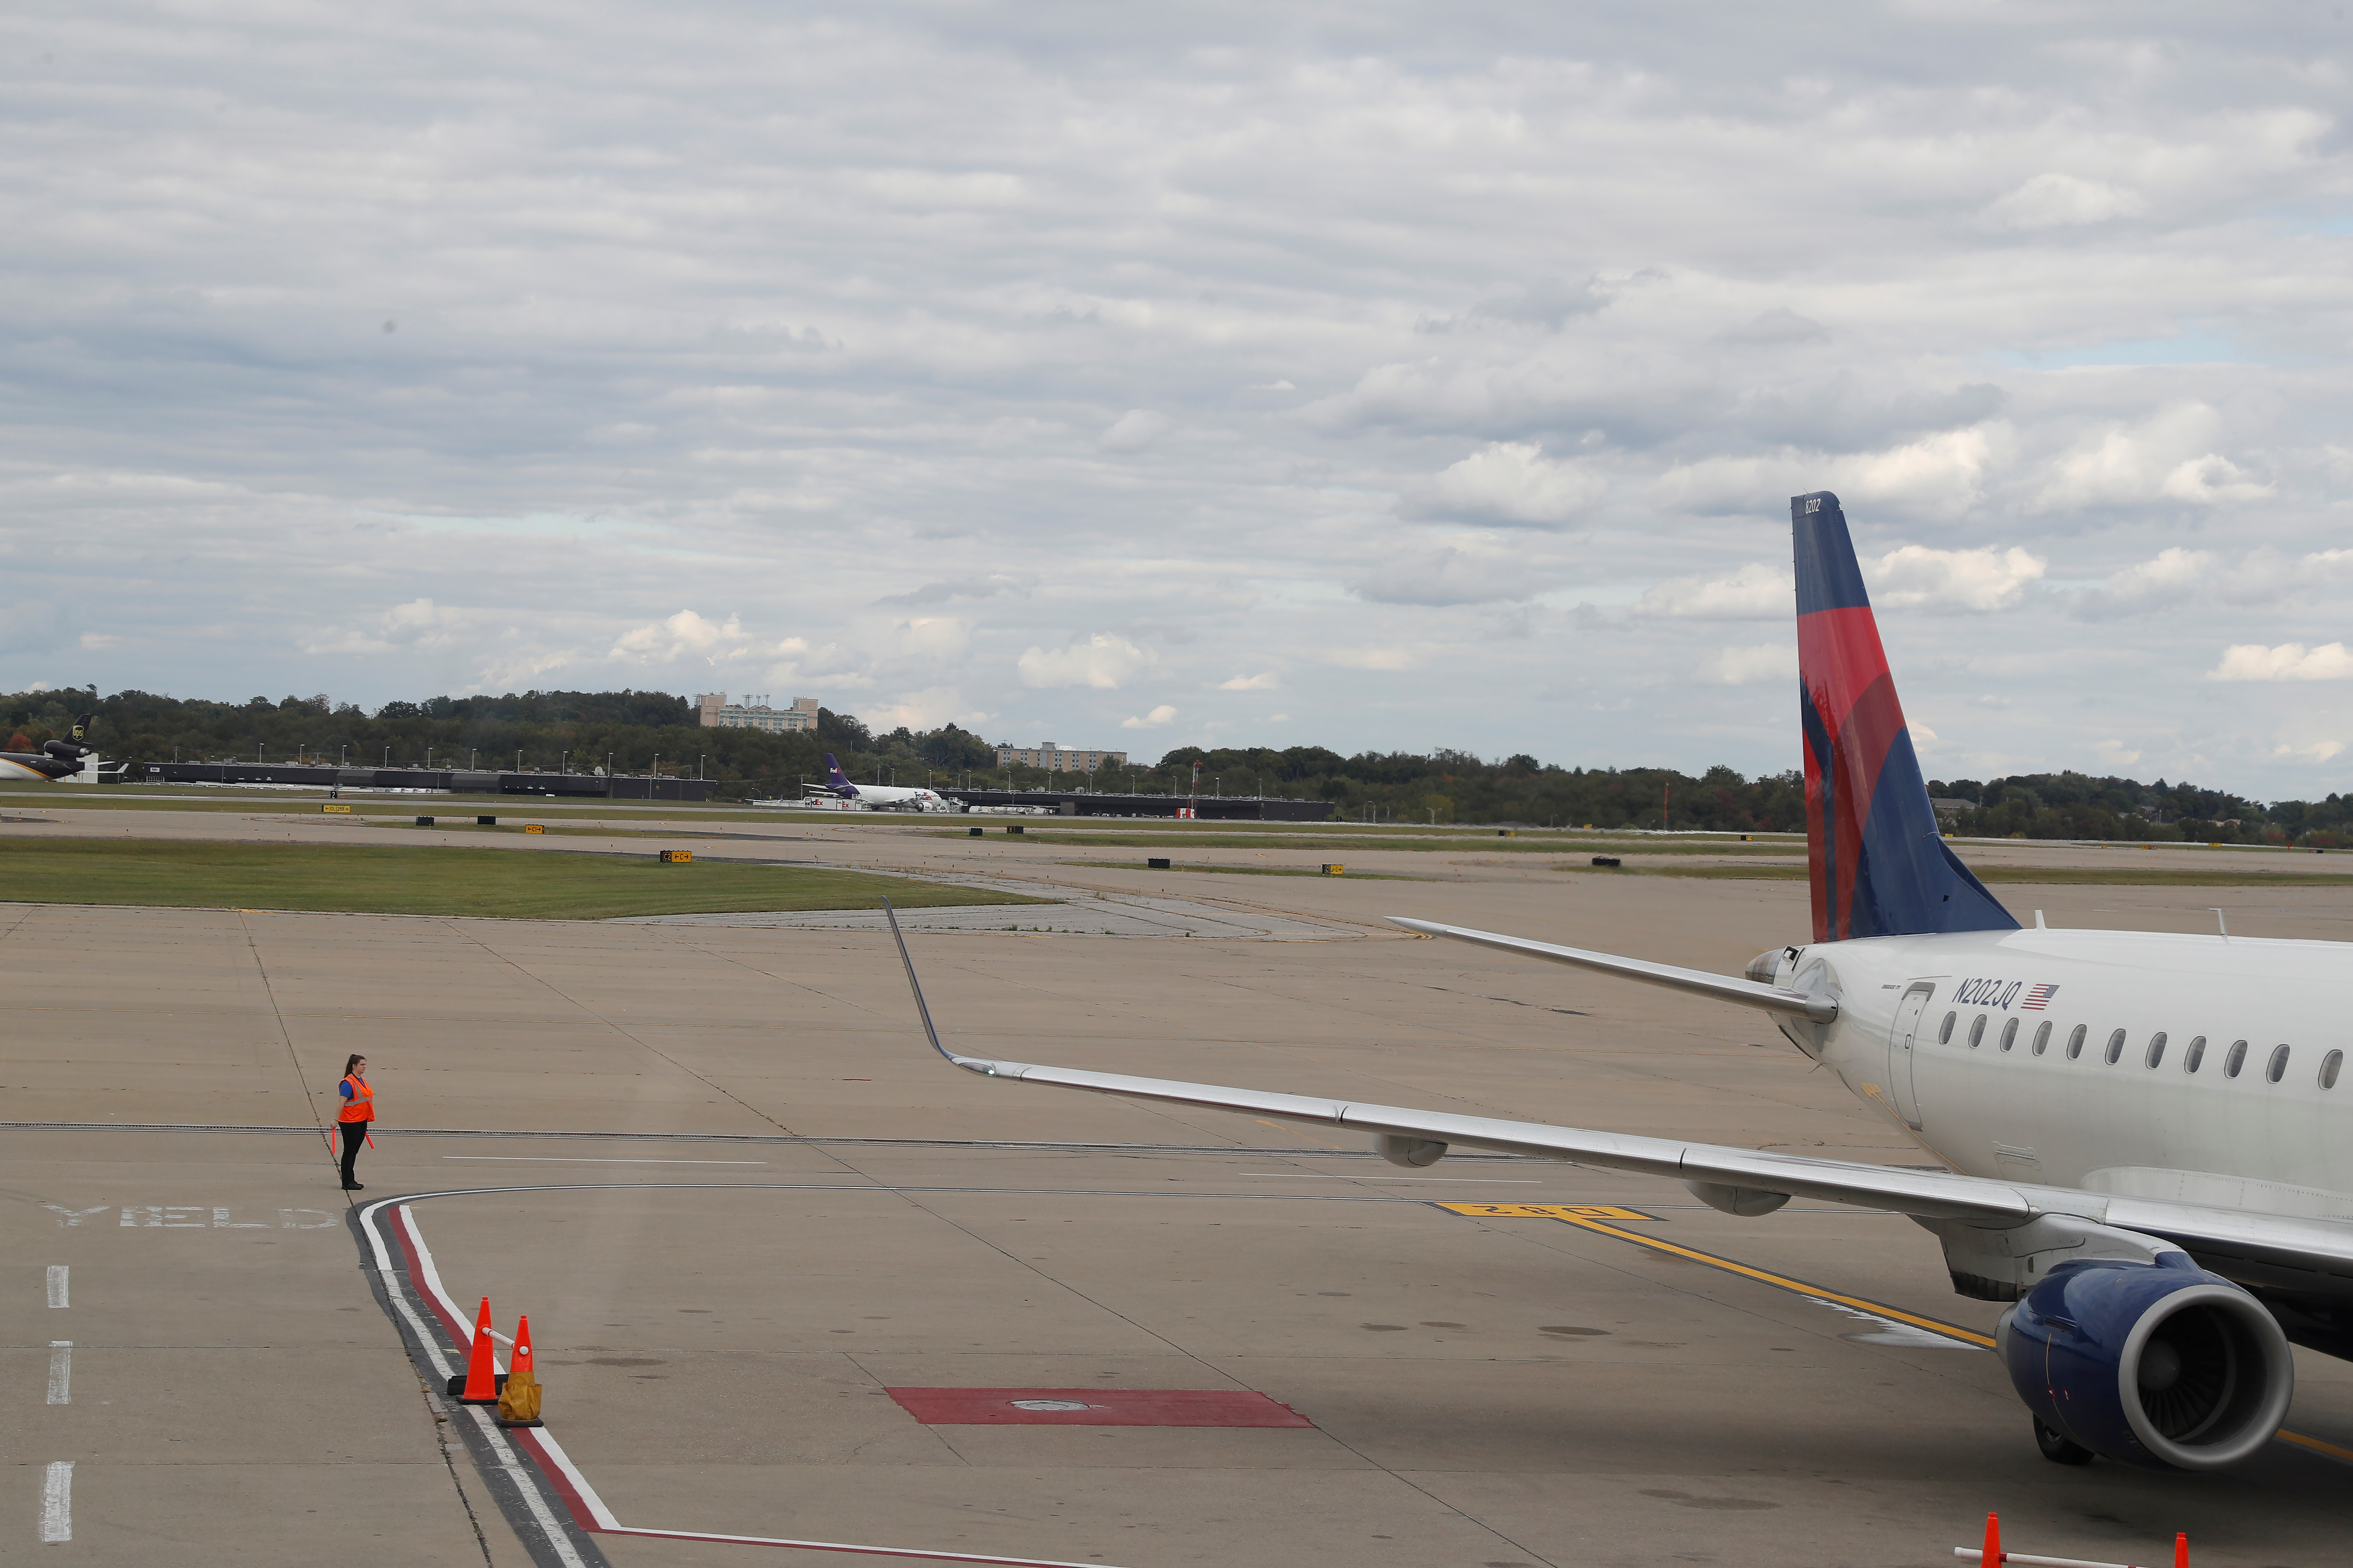 An airport worker stands on a tarmac next to a Delta Air Lines plane at Pittsburgh International Airport in Pittsburgh, Pennsylvania